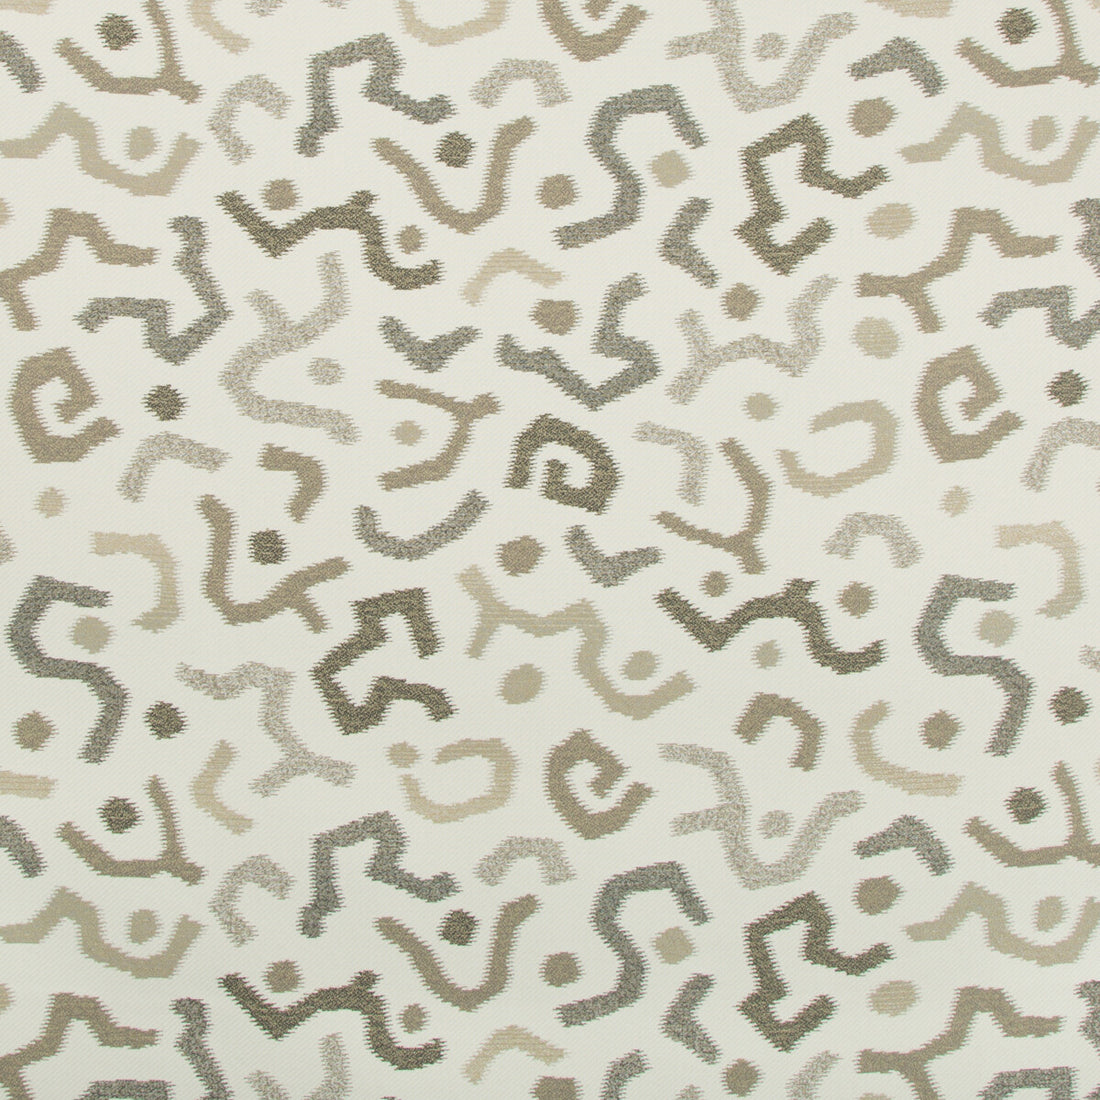 Mahe fabric in driftwood color - pattern 34884.16.0 - by Kravet Design in the Oceania Indoor Outdoor collection